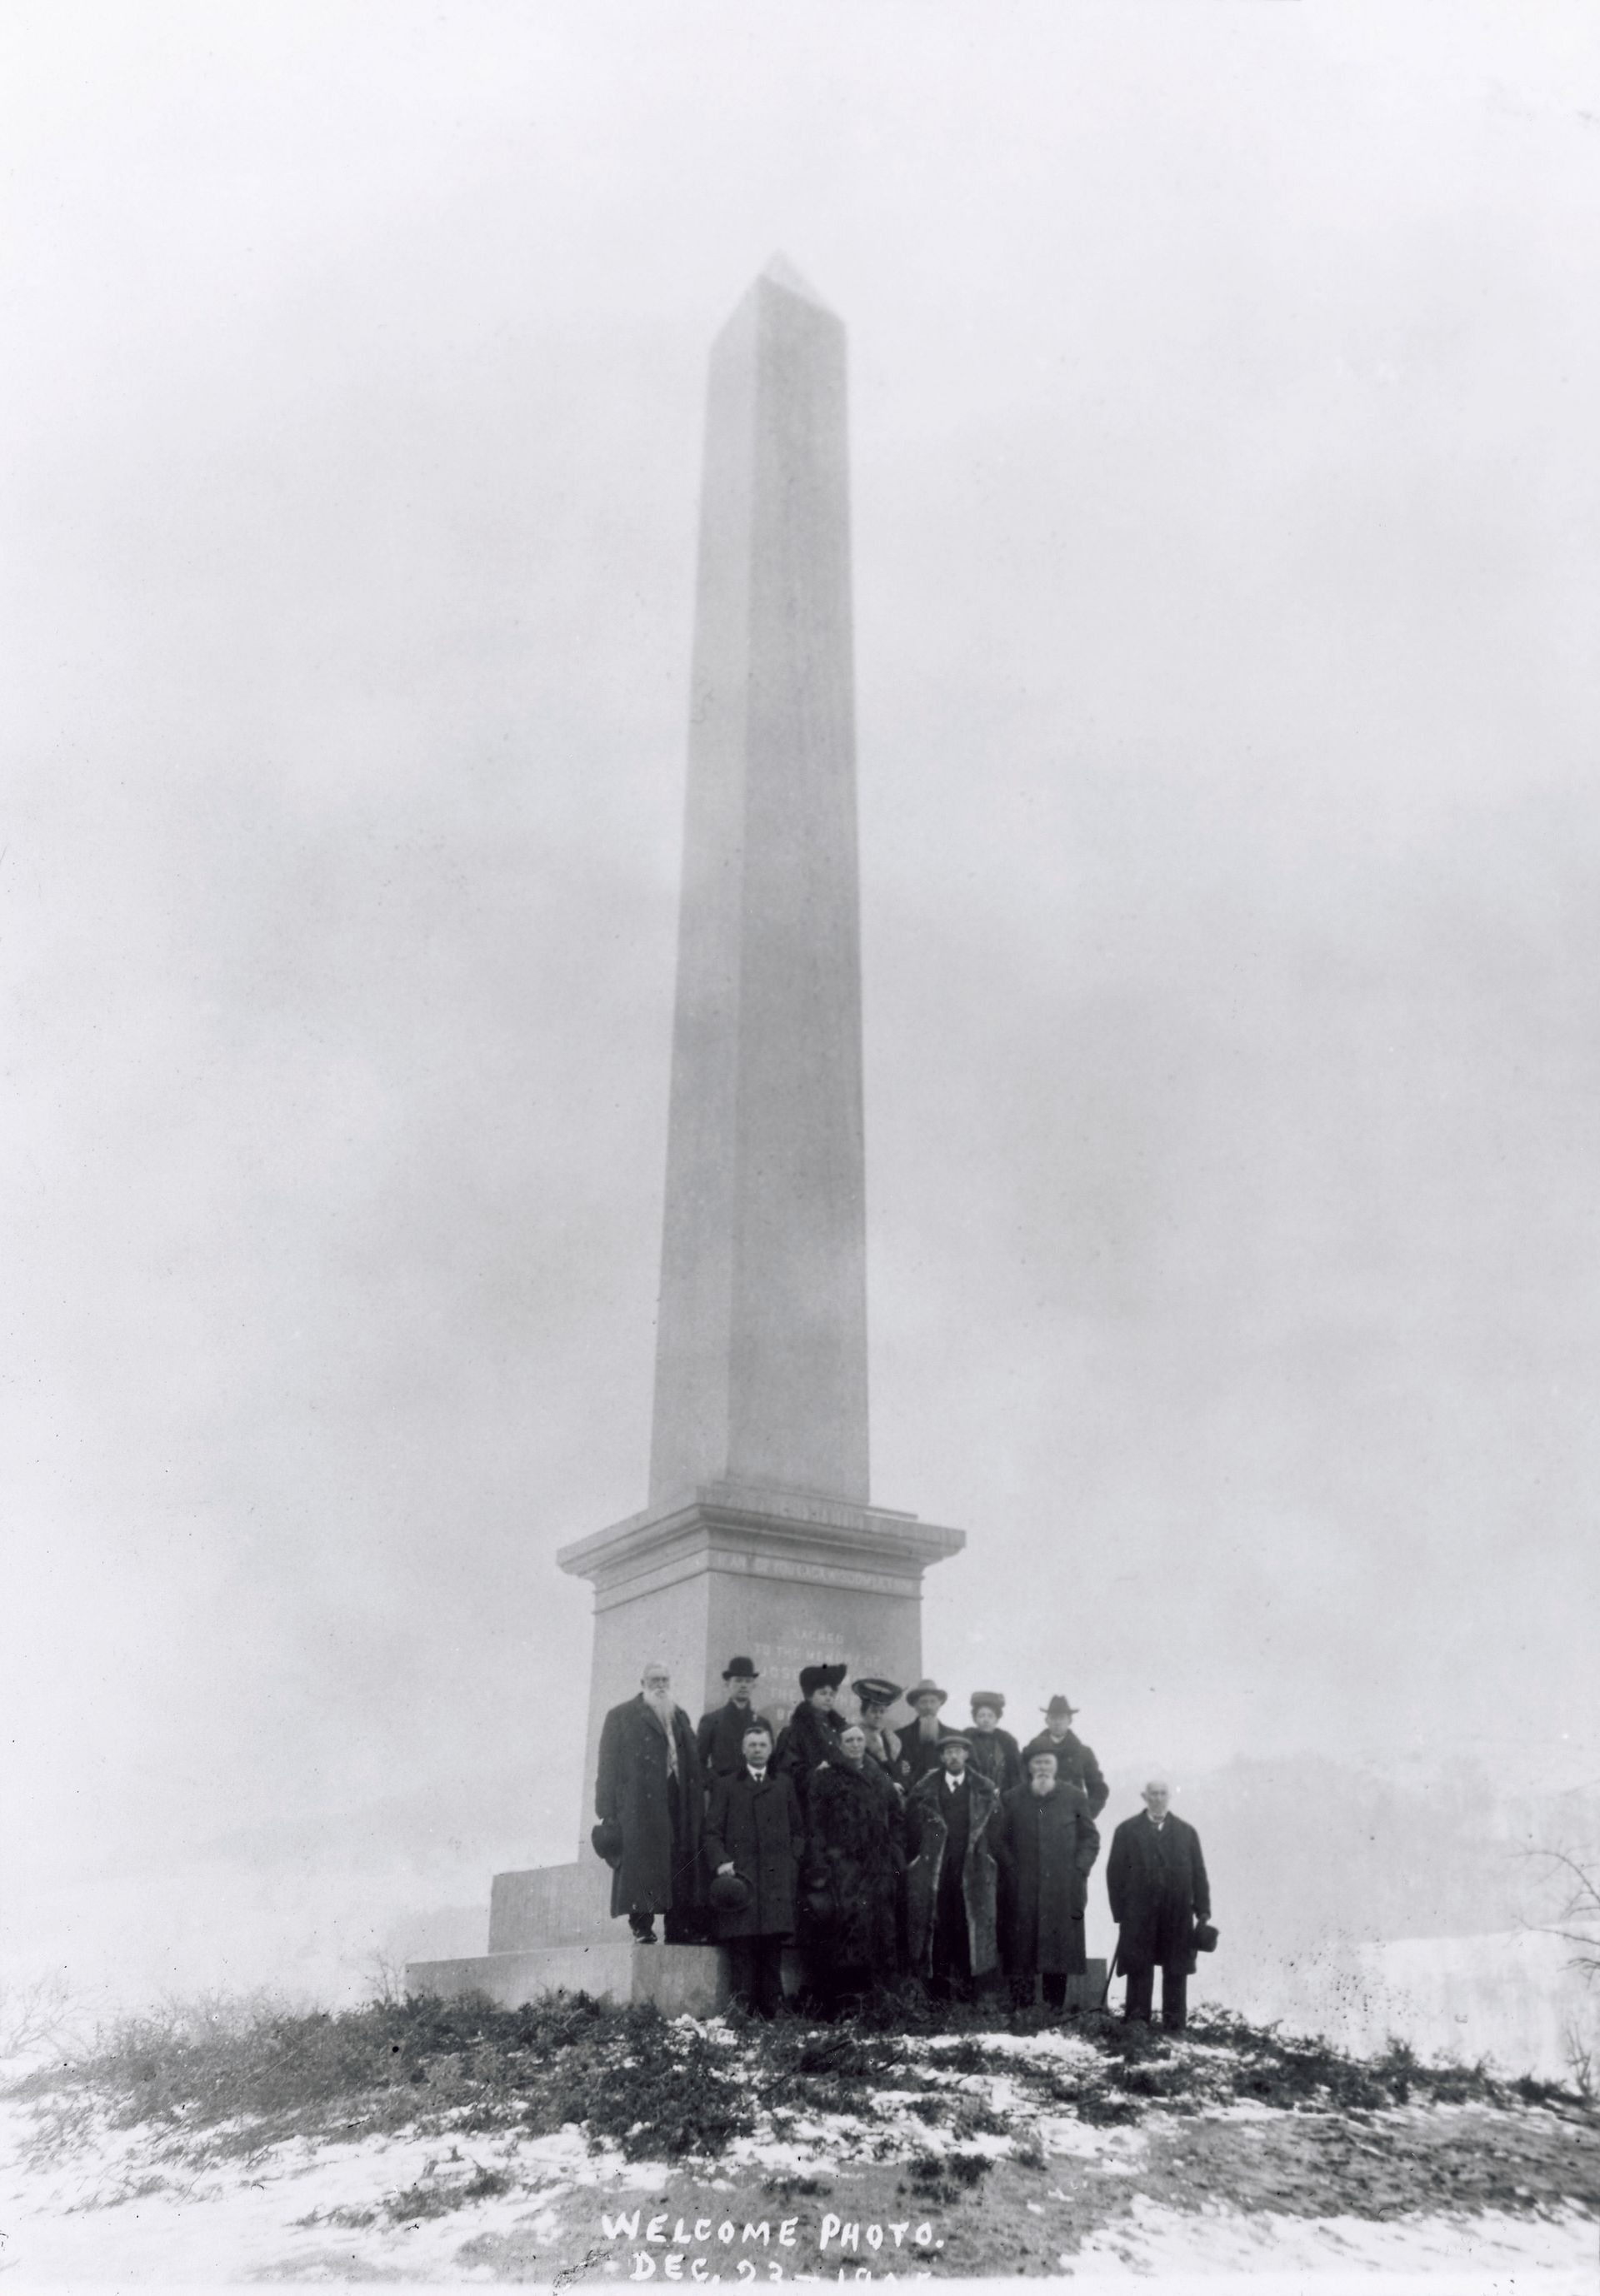 A photograph of George Albert Smith and other Church leaders at a monument for Joseph Smith’s birthplace in Sharon, Vermont, dated December 23, 1905. Teachings of Presidents of the Church: George Albert Smith (2011), 32